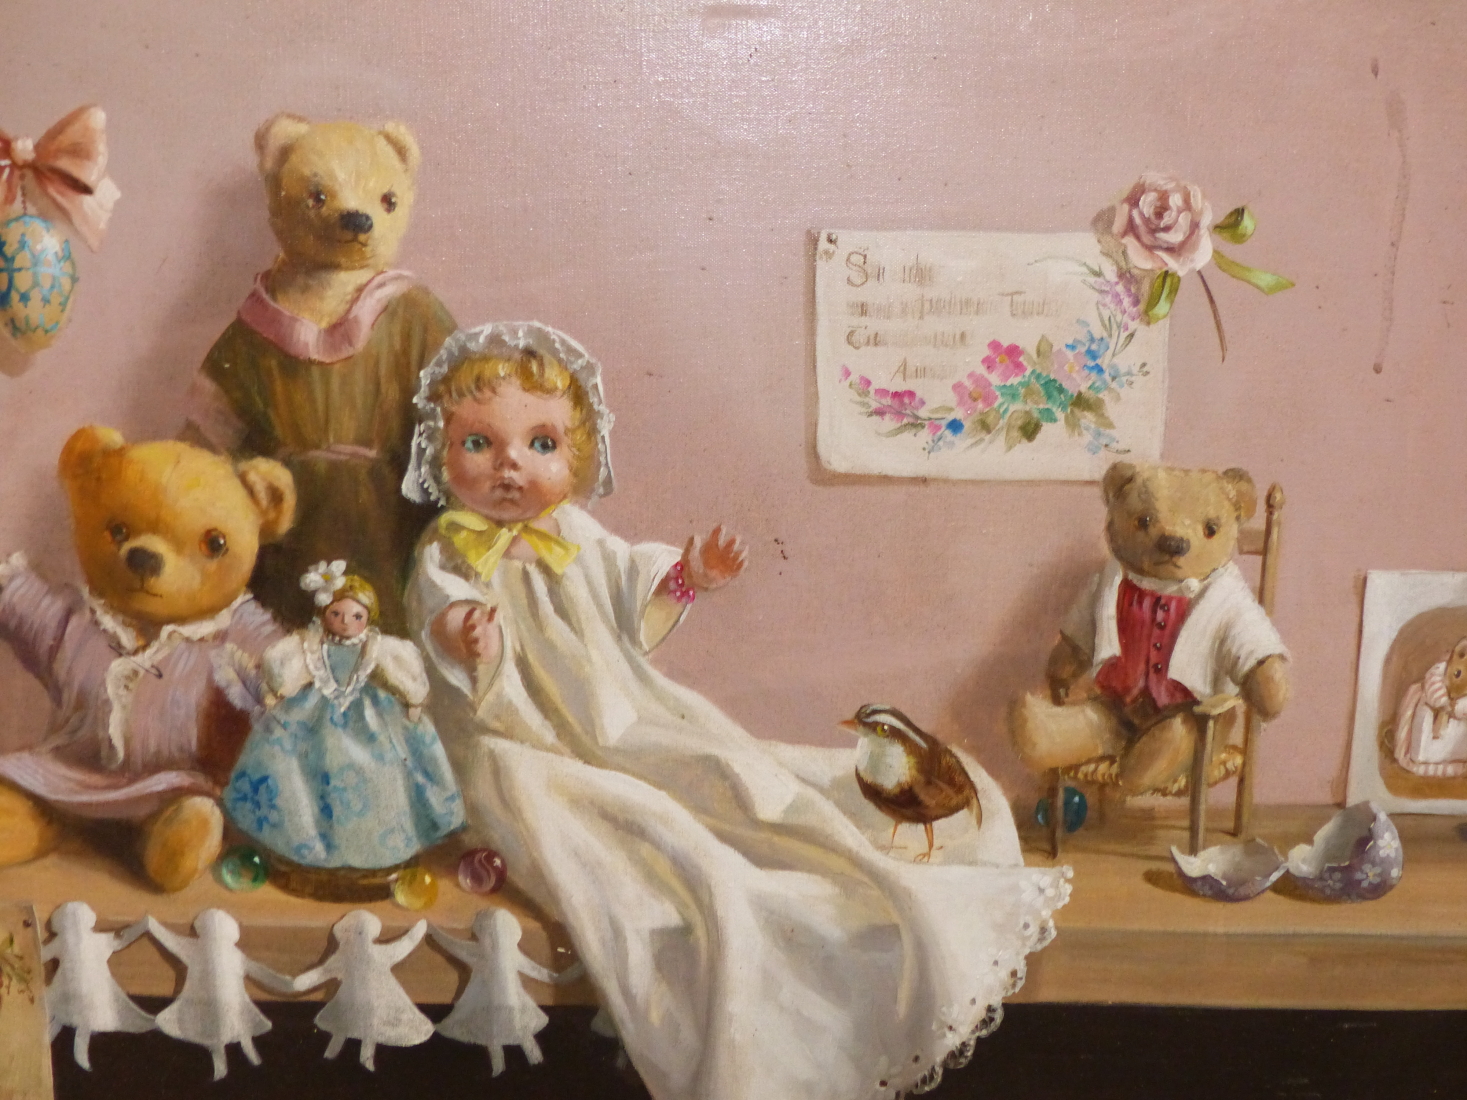 DEBORAH JONES (1921-2012) ARR, TEDDY BEARS AND DOLLS ON A SHELF, SIGNED AND DATED 1982, OIL ON - Image 5 of 5